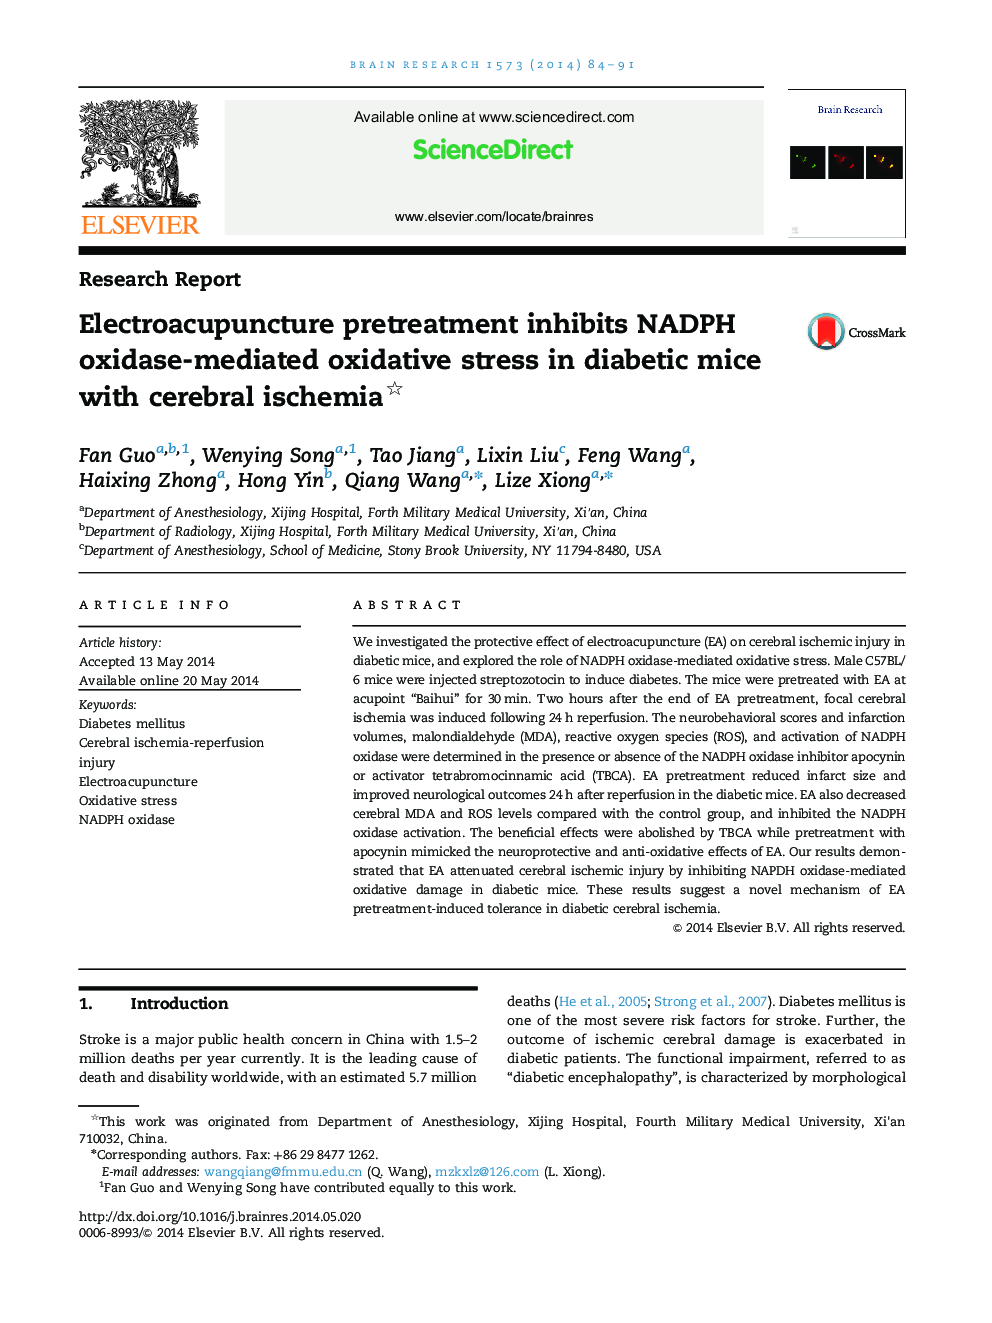 Research ReportElectroacupuncture pretreatment inhibits NADPH oxidase-mediated oxidative stress in diabetic mice with cerebral ischemia